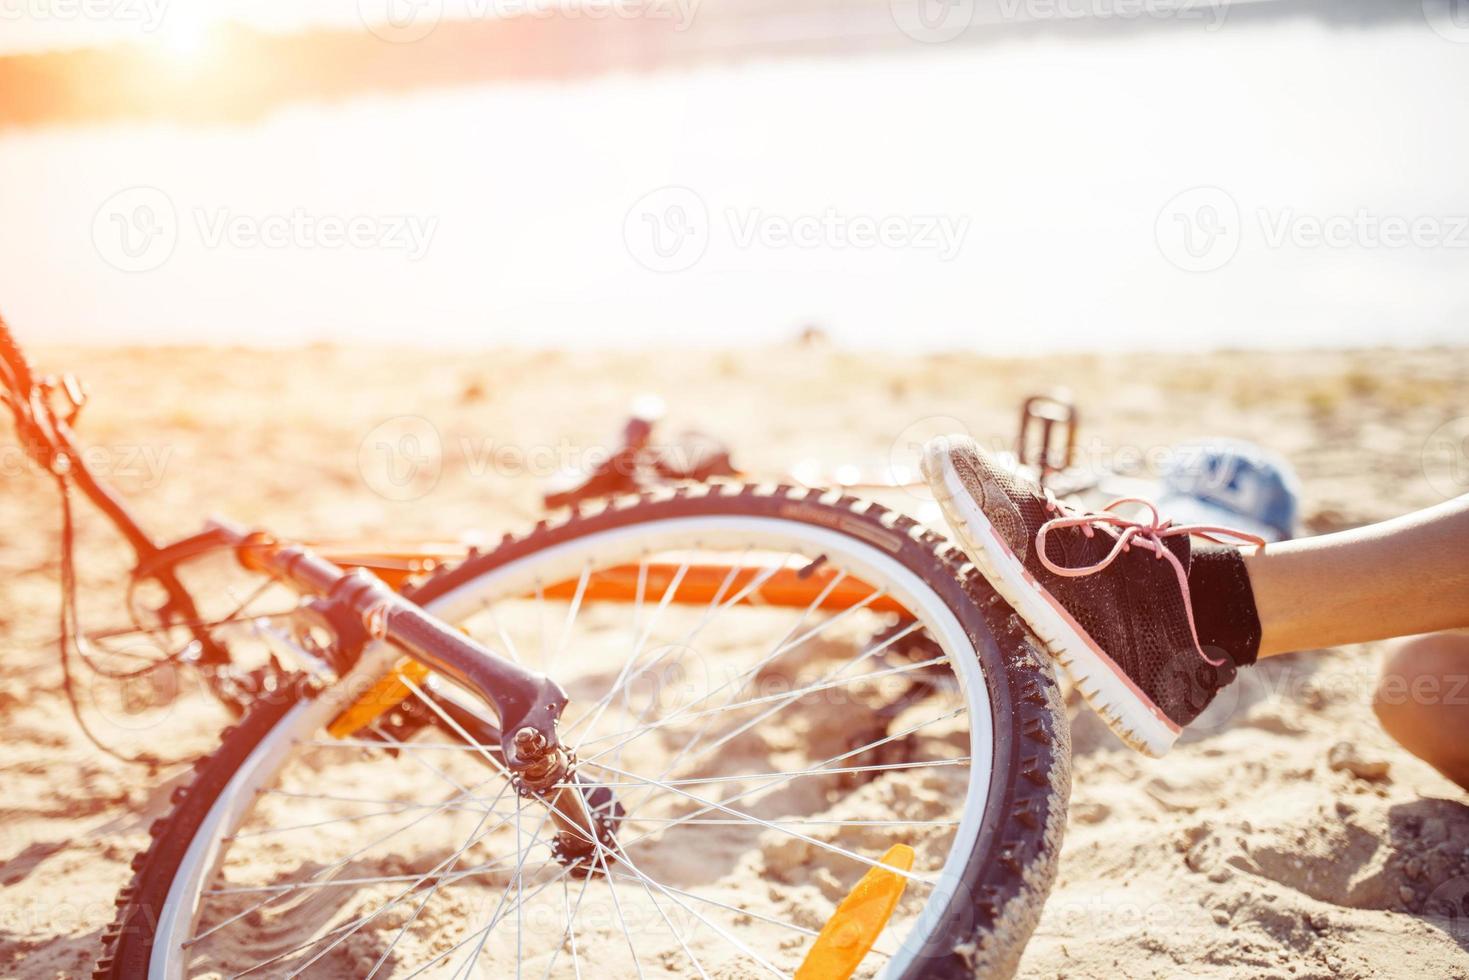 woman on a bicycle in beach photo